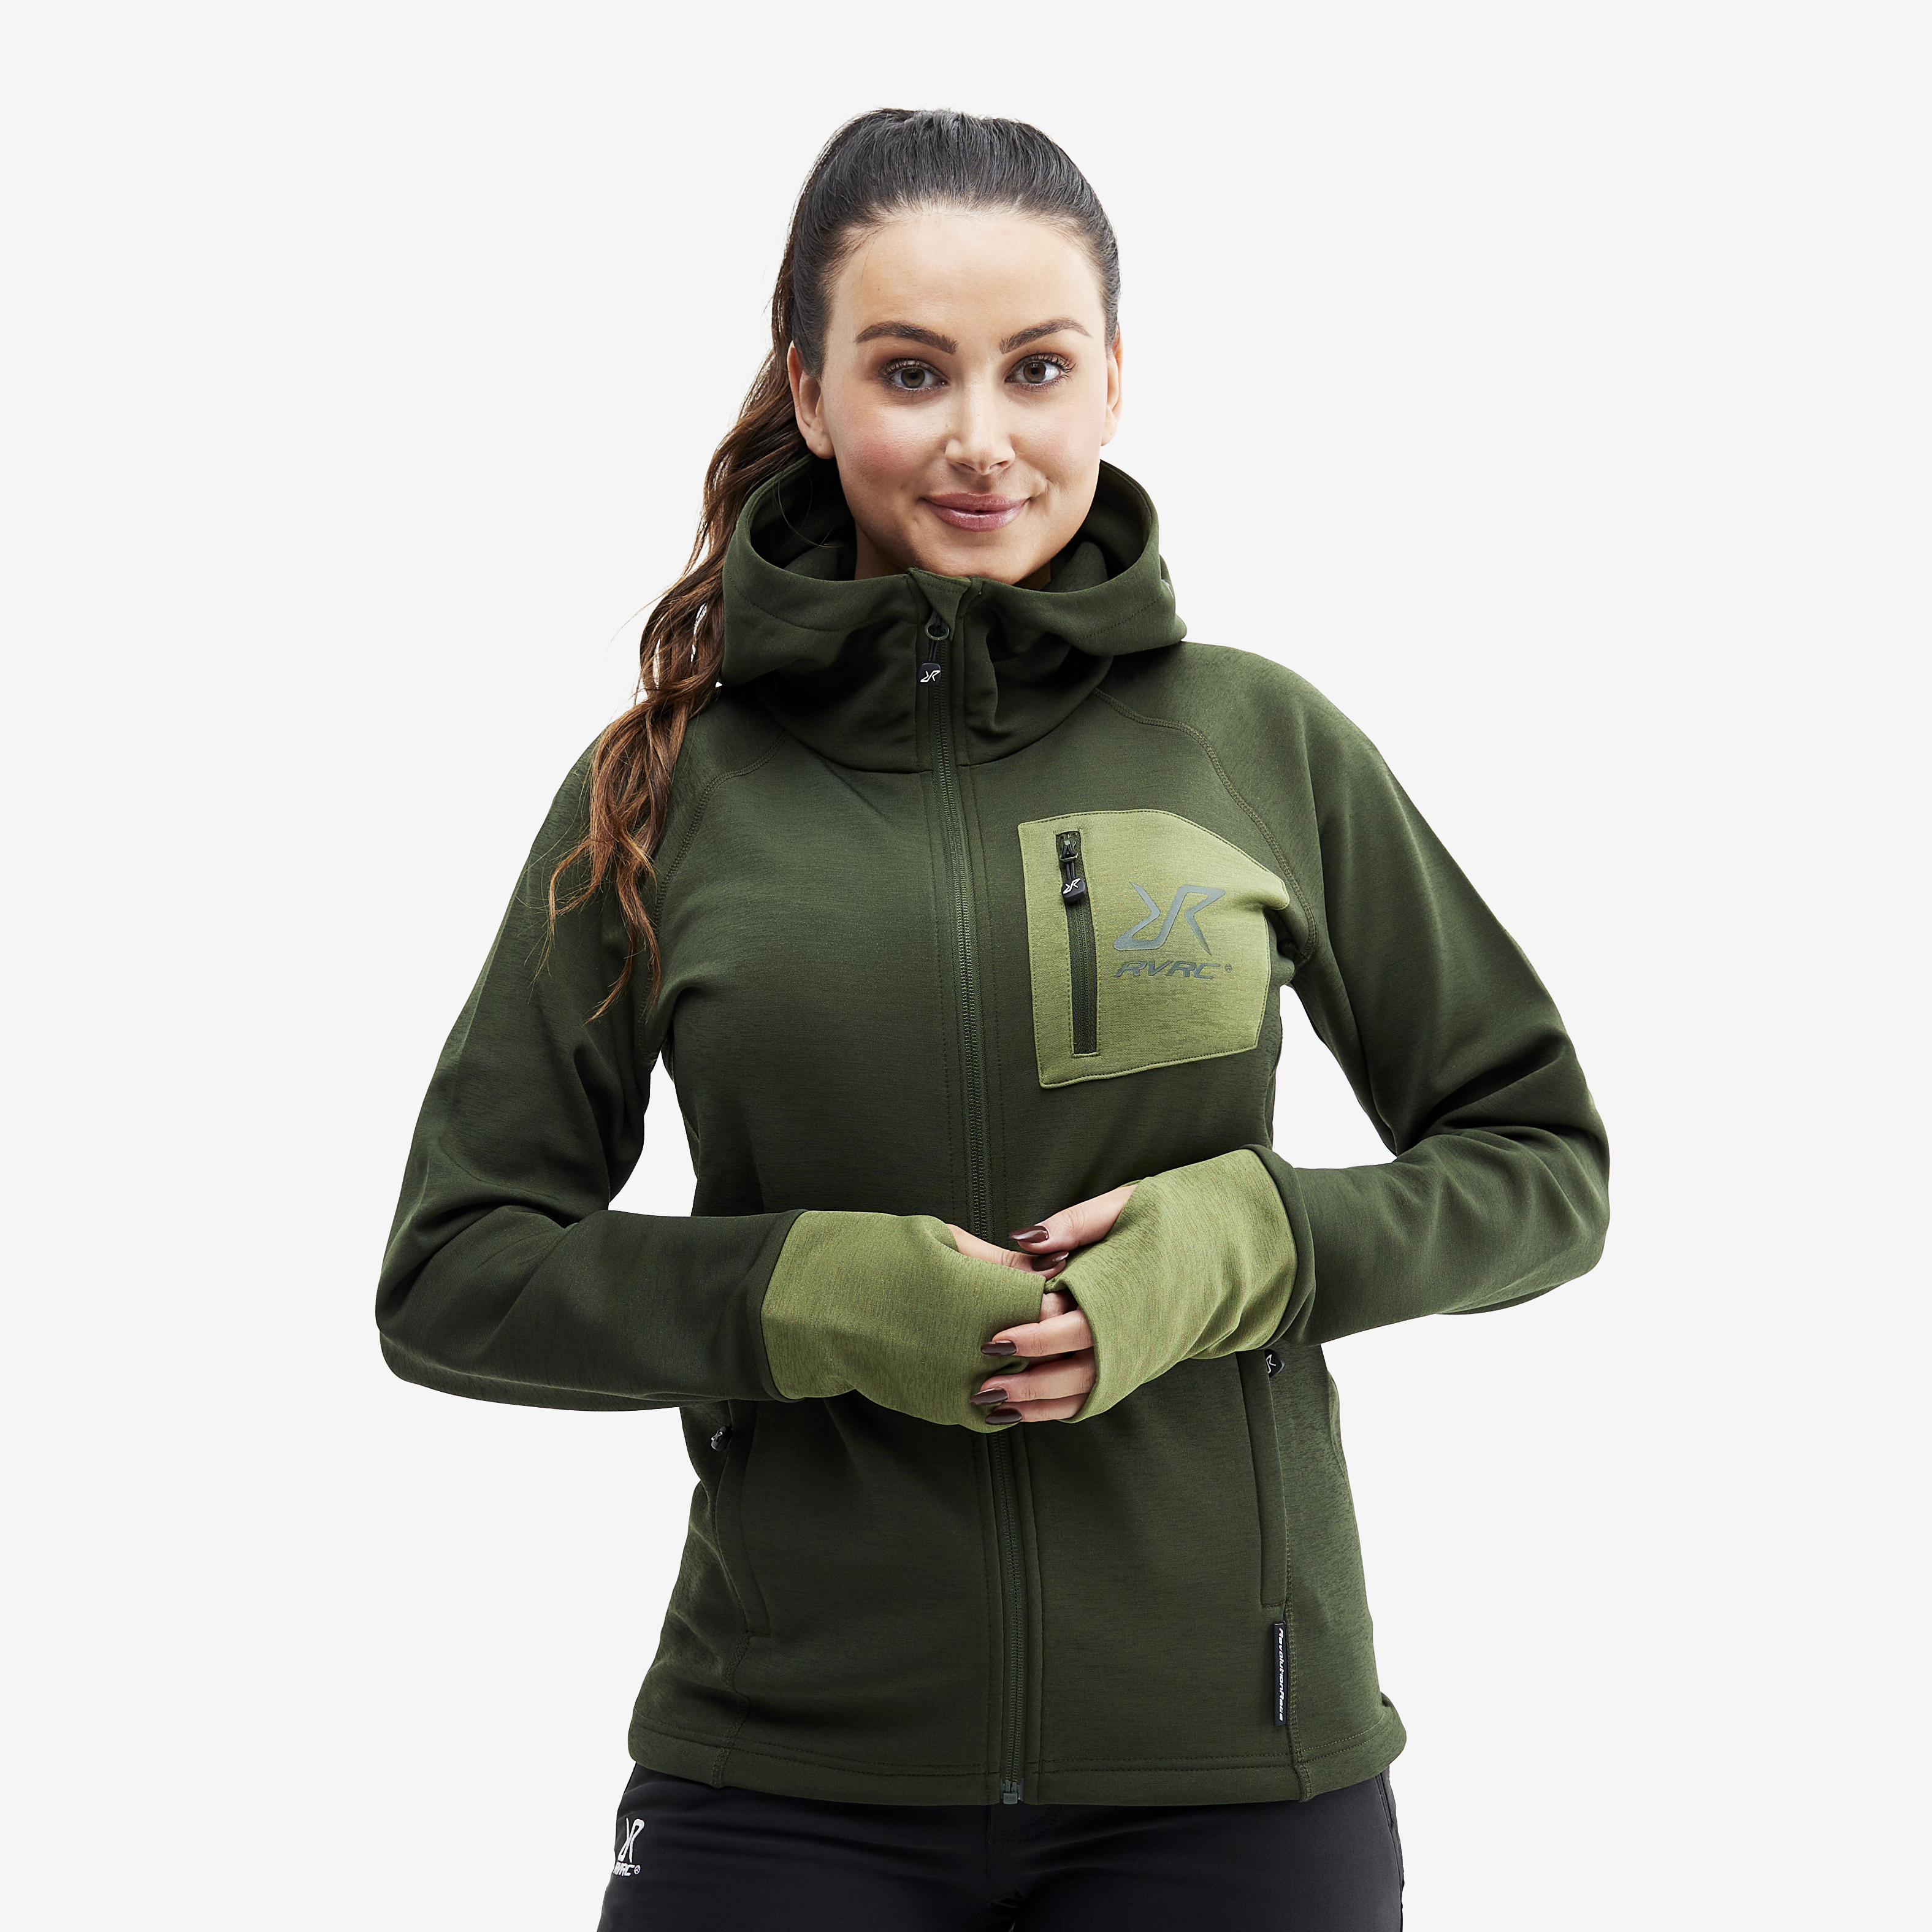 Illusion Hoodie Forest Green Naistele